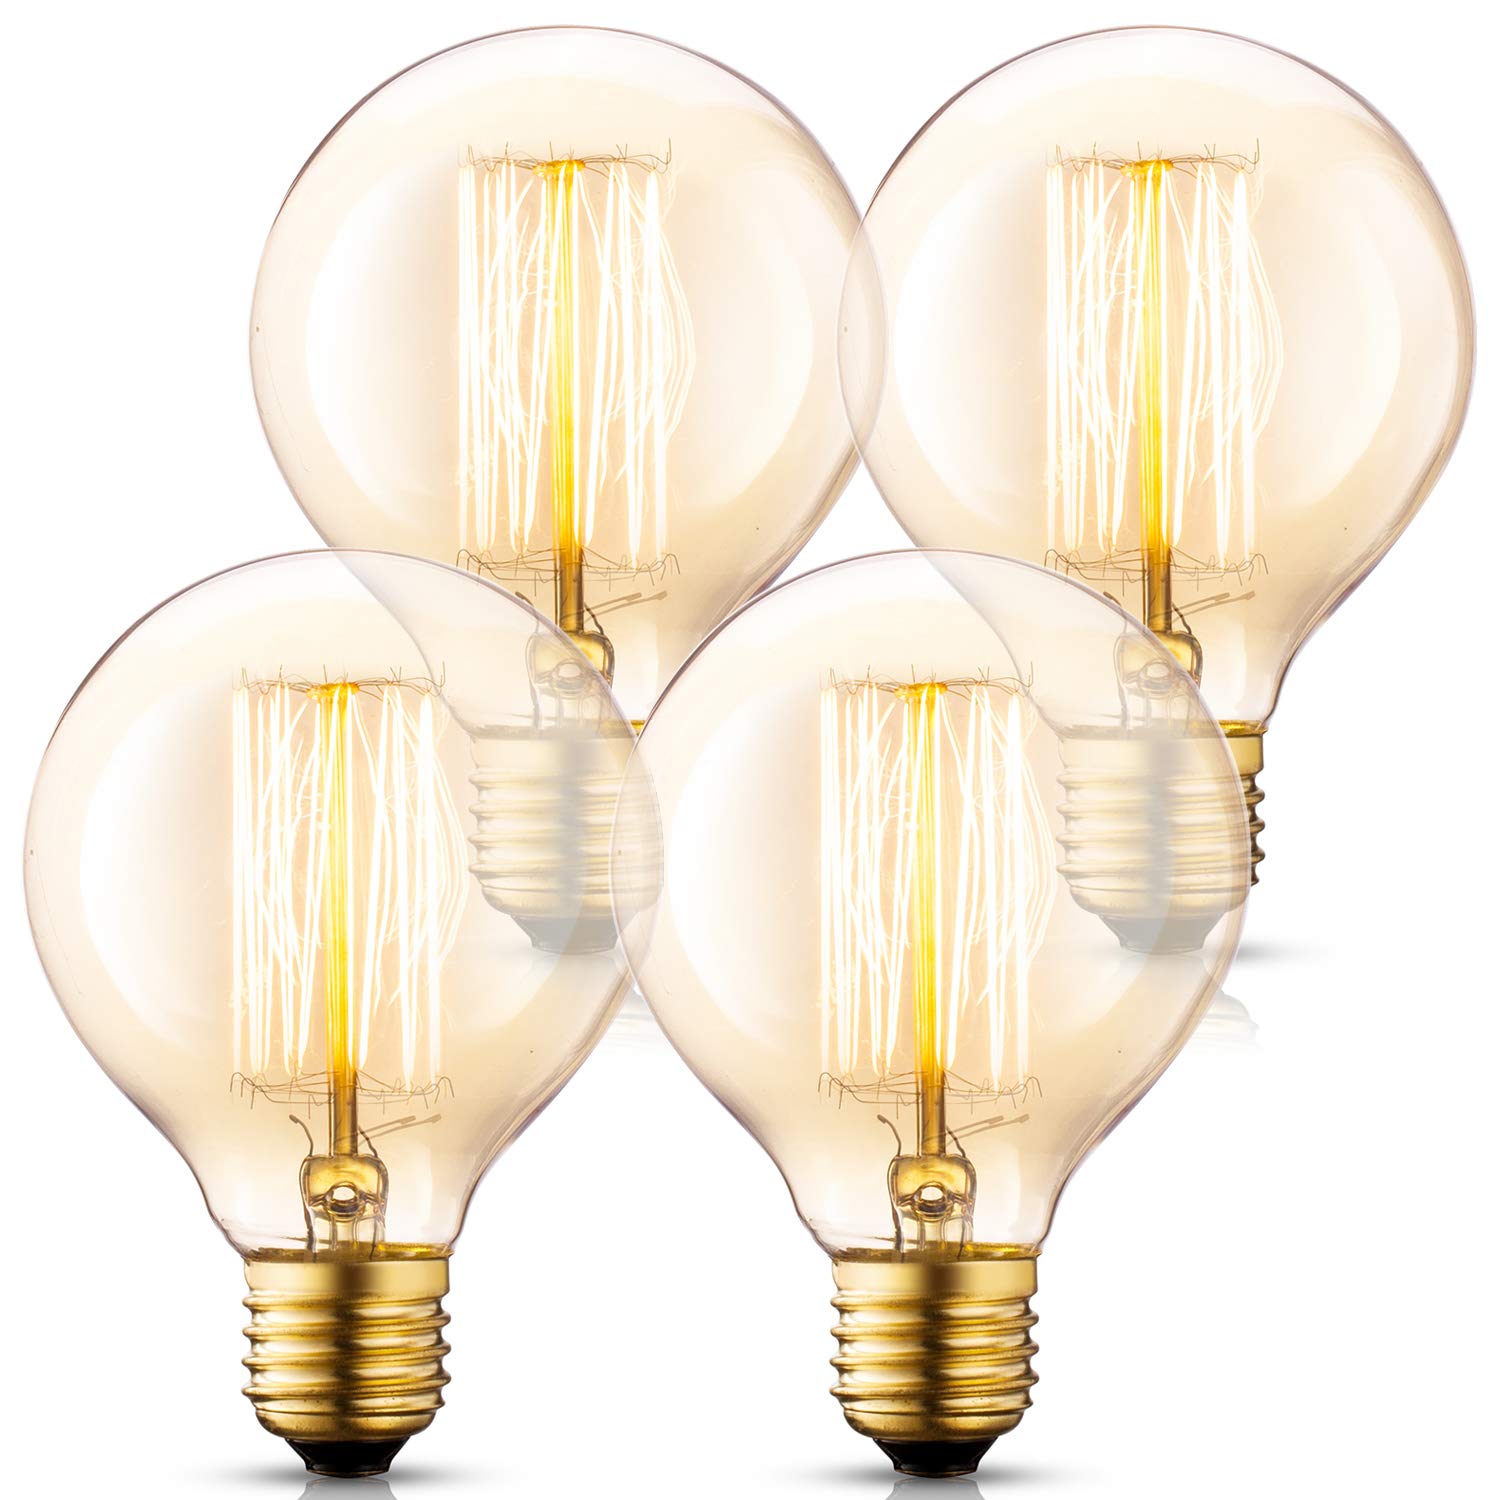 Asgens G95 Globe Vintage Edison Bulb Set, 40W E27 Amber Glass Wootly Vintage Retro Old Fashioned - Industry - Dimmable - Decorative Light Bulbs, 4Pack